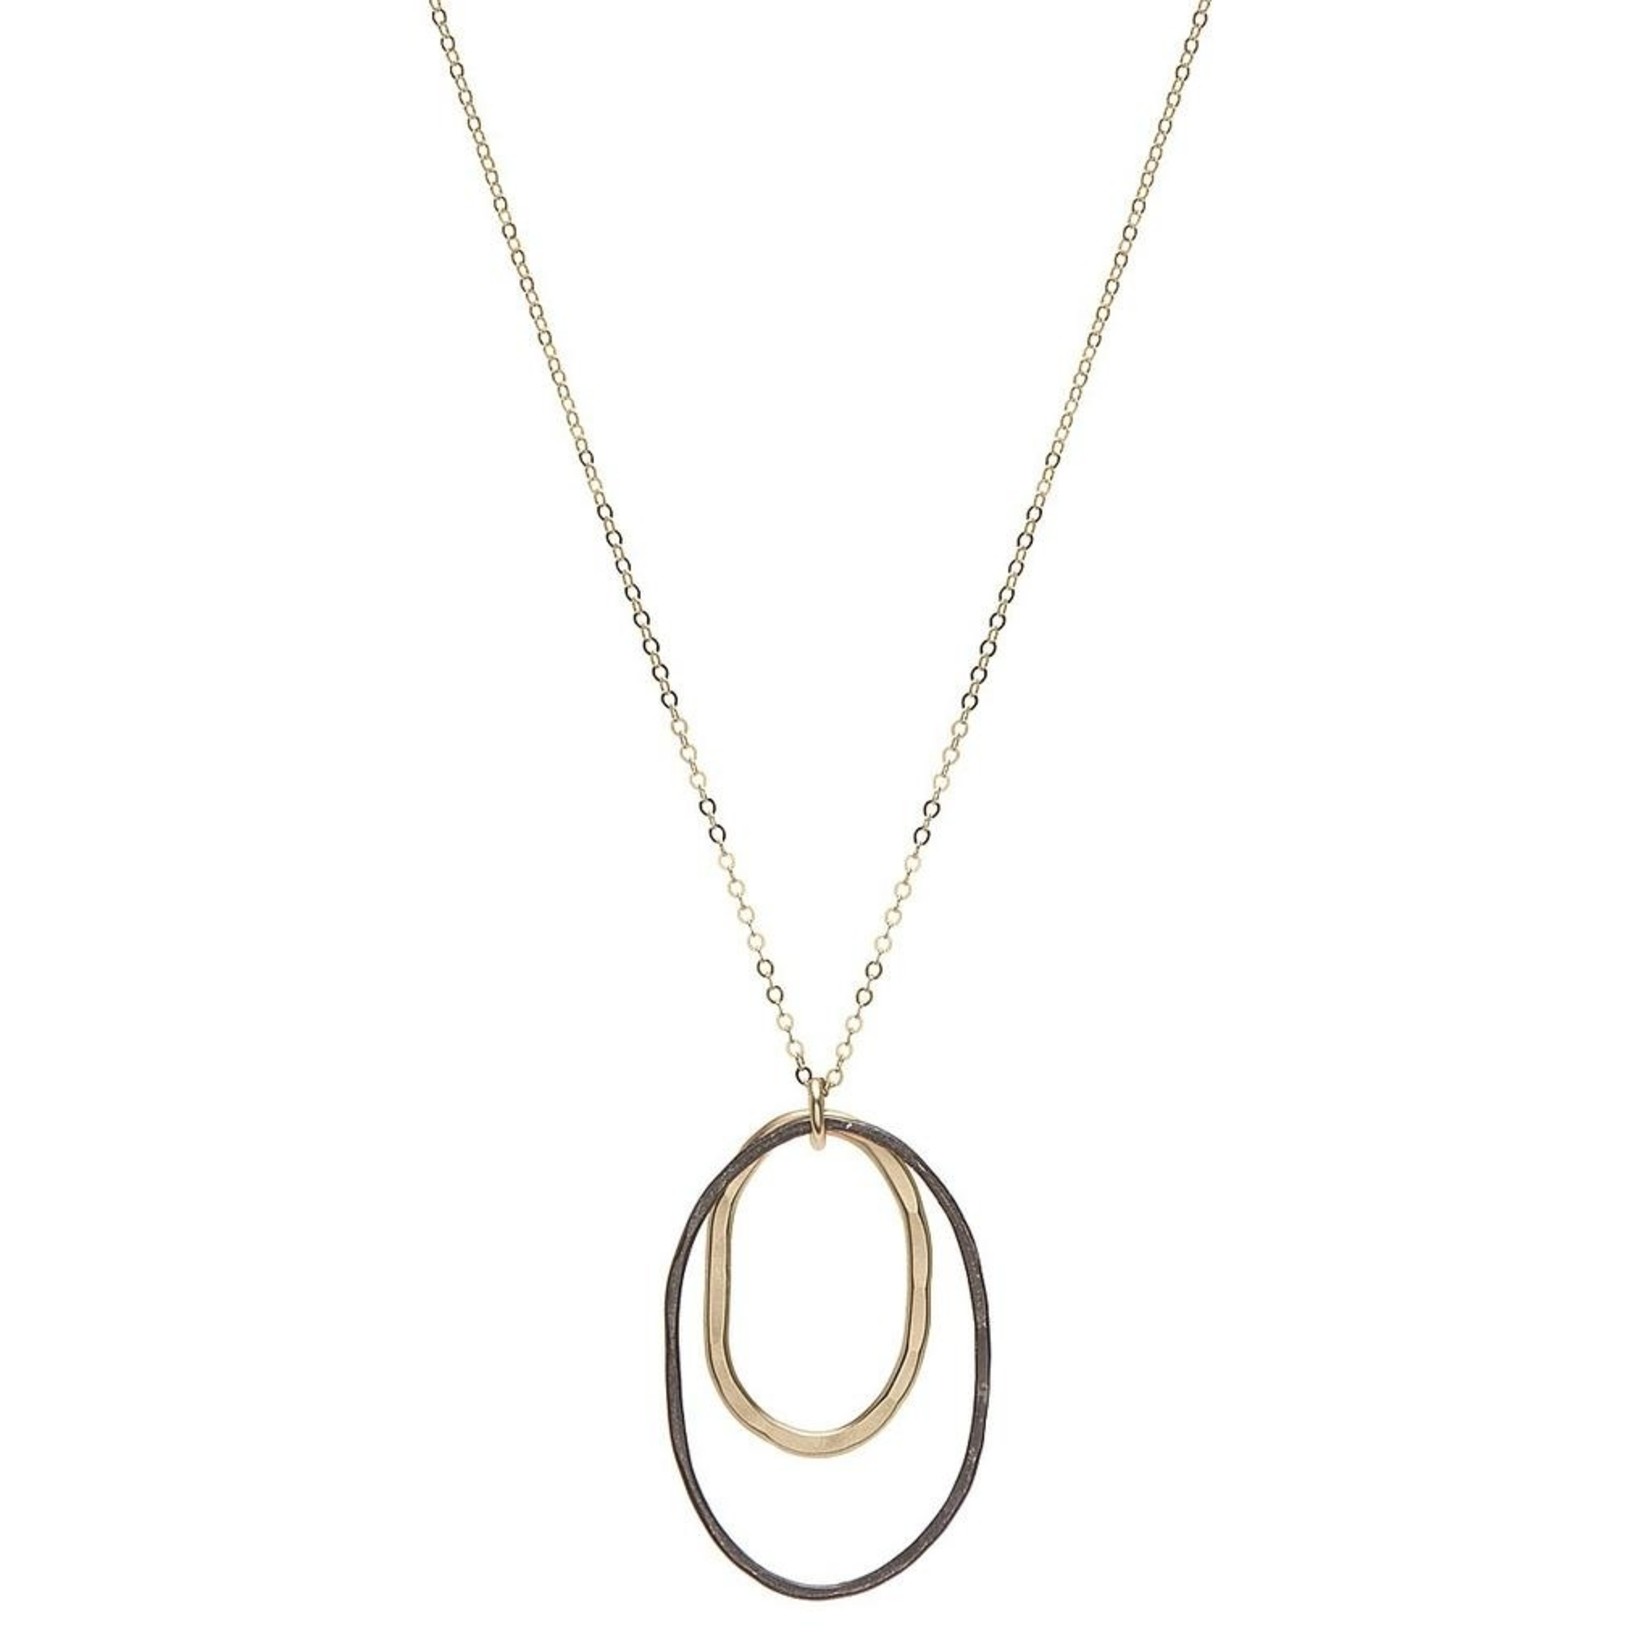 Handmade Black Oxidized Sterling Silver Oval and 14k Goldfill Oval on Goldfill Chain Necklace, 18"